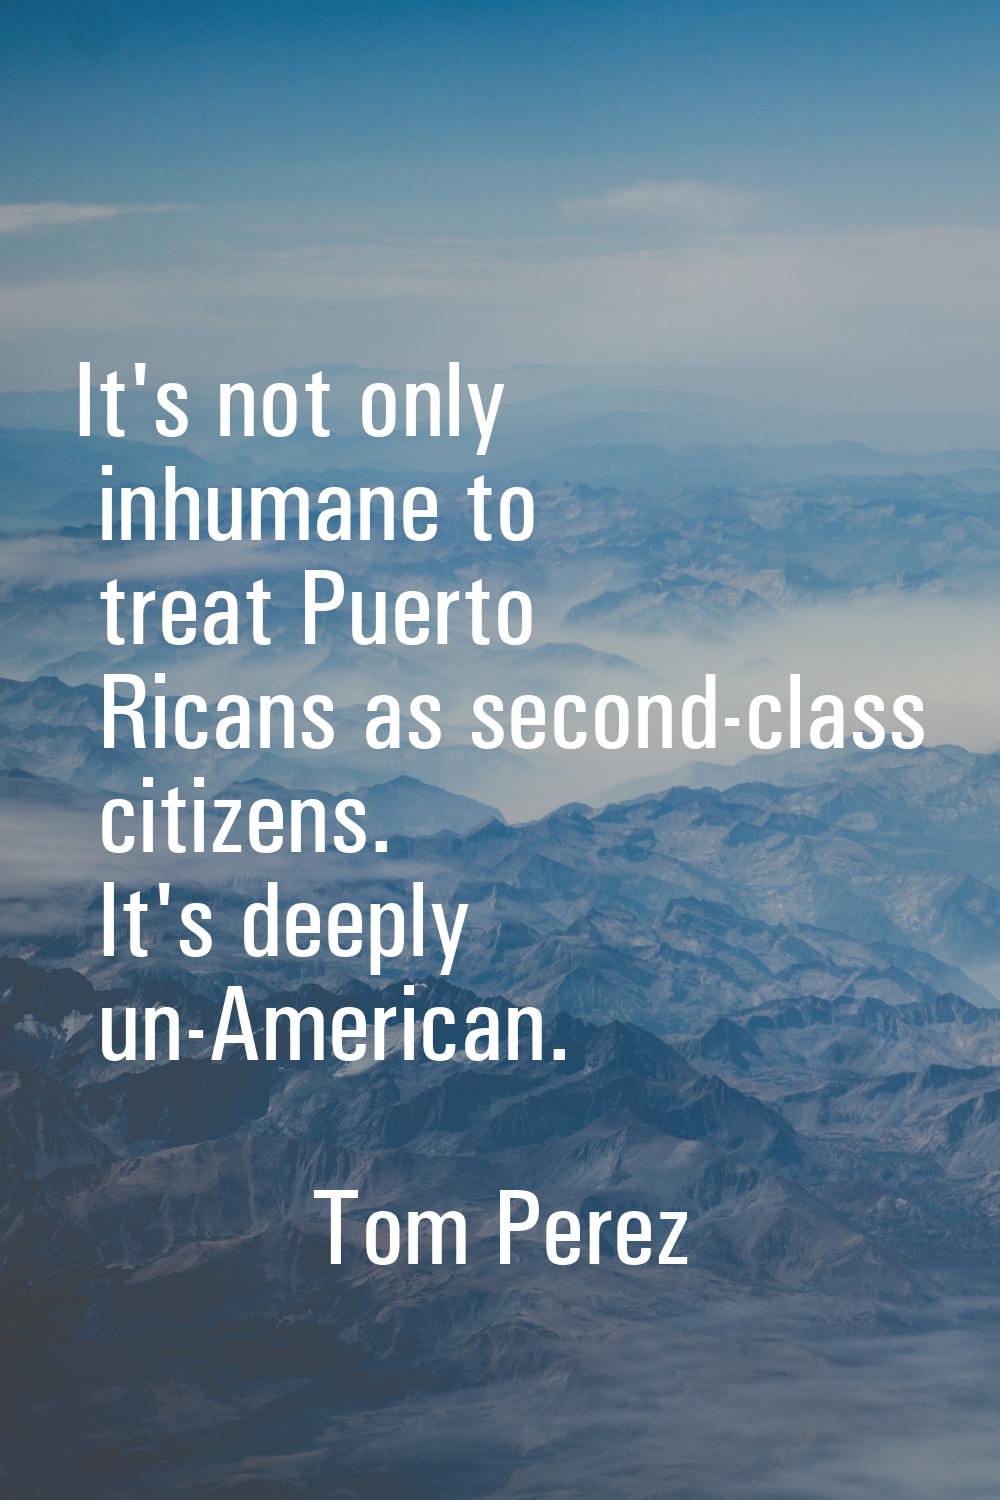 It's not only inhumane to treat Puerto Ricans as second-class citizens. It's deeply un-American.